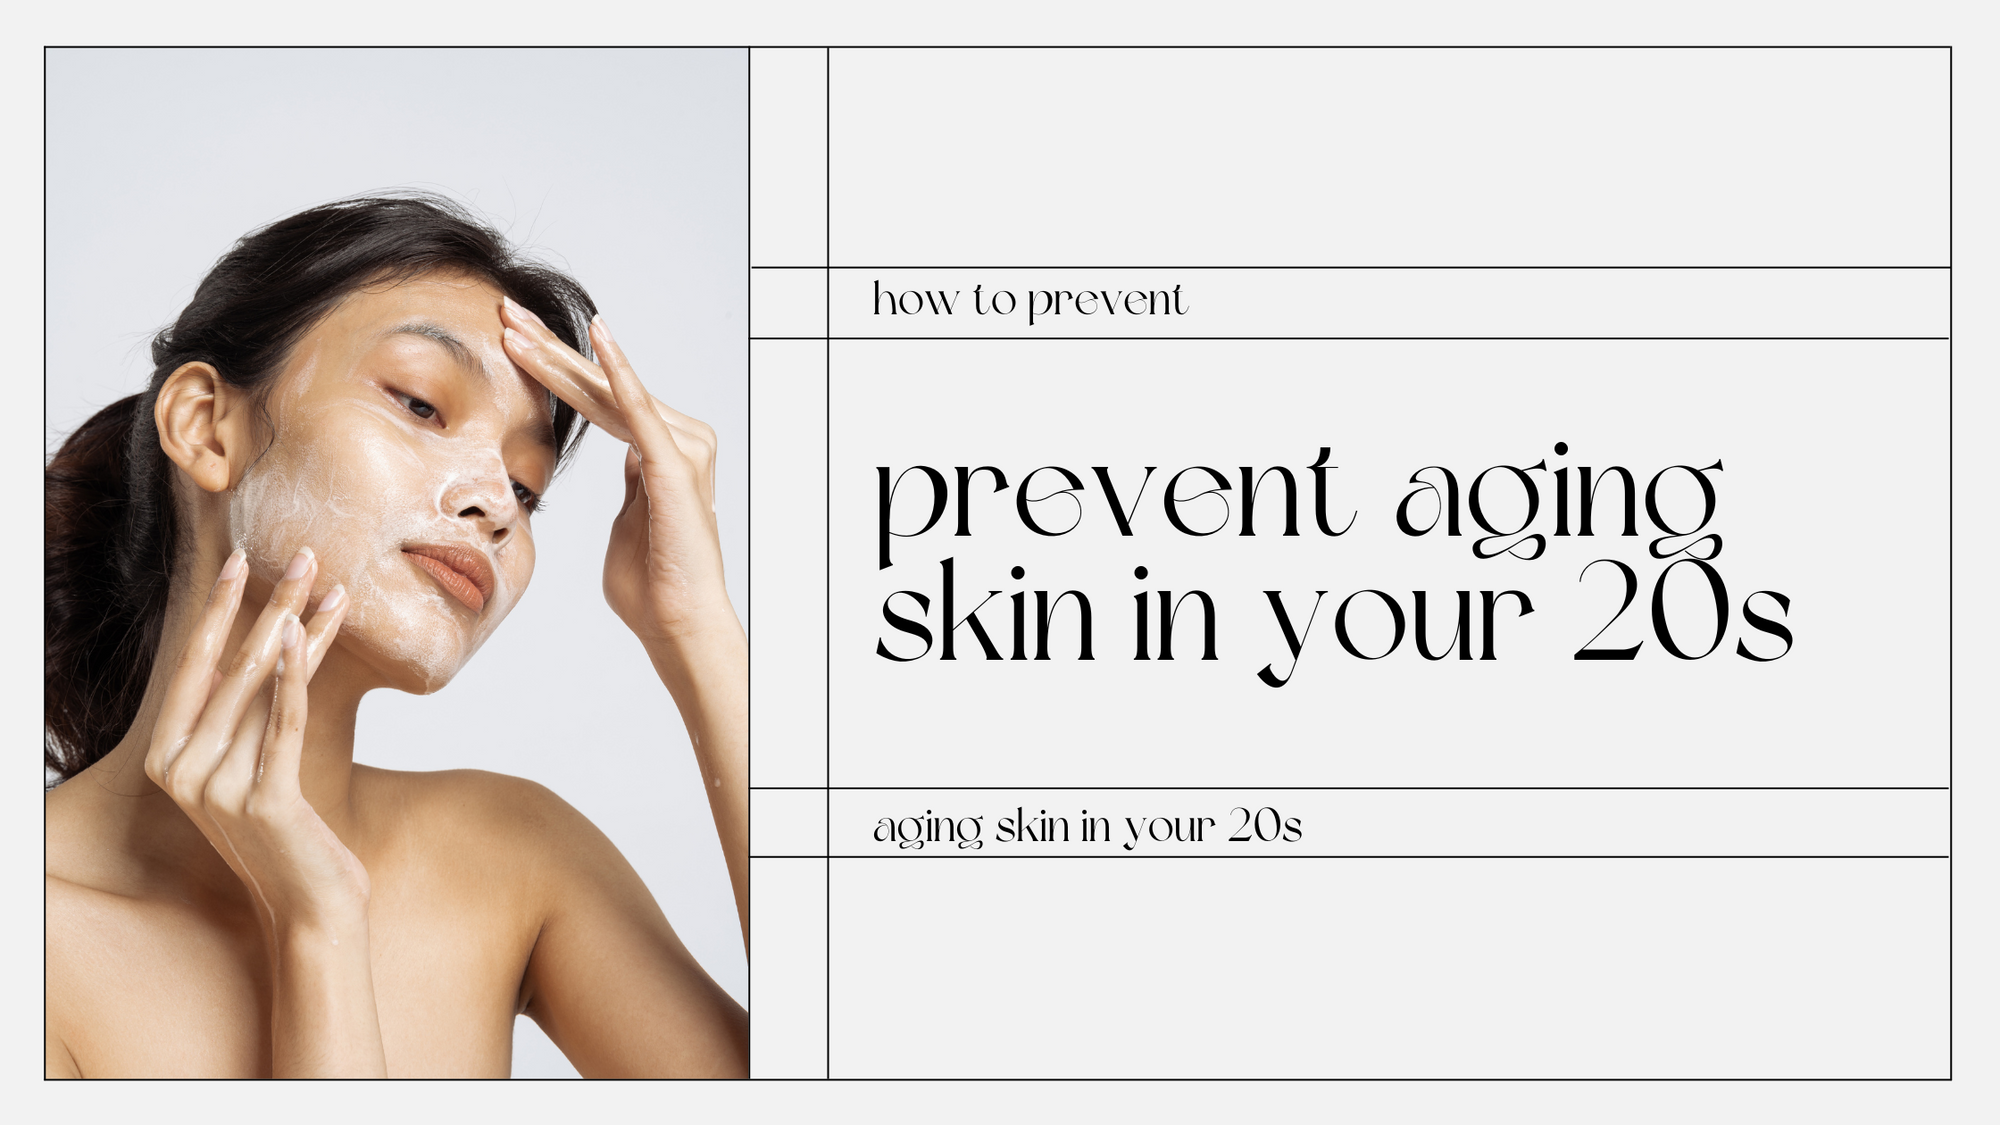 How to prevent aging skin in your 20s